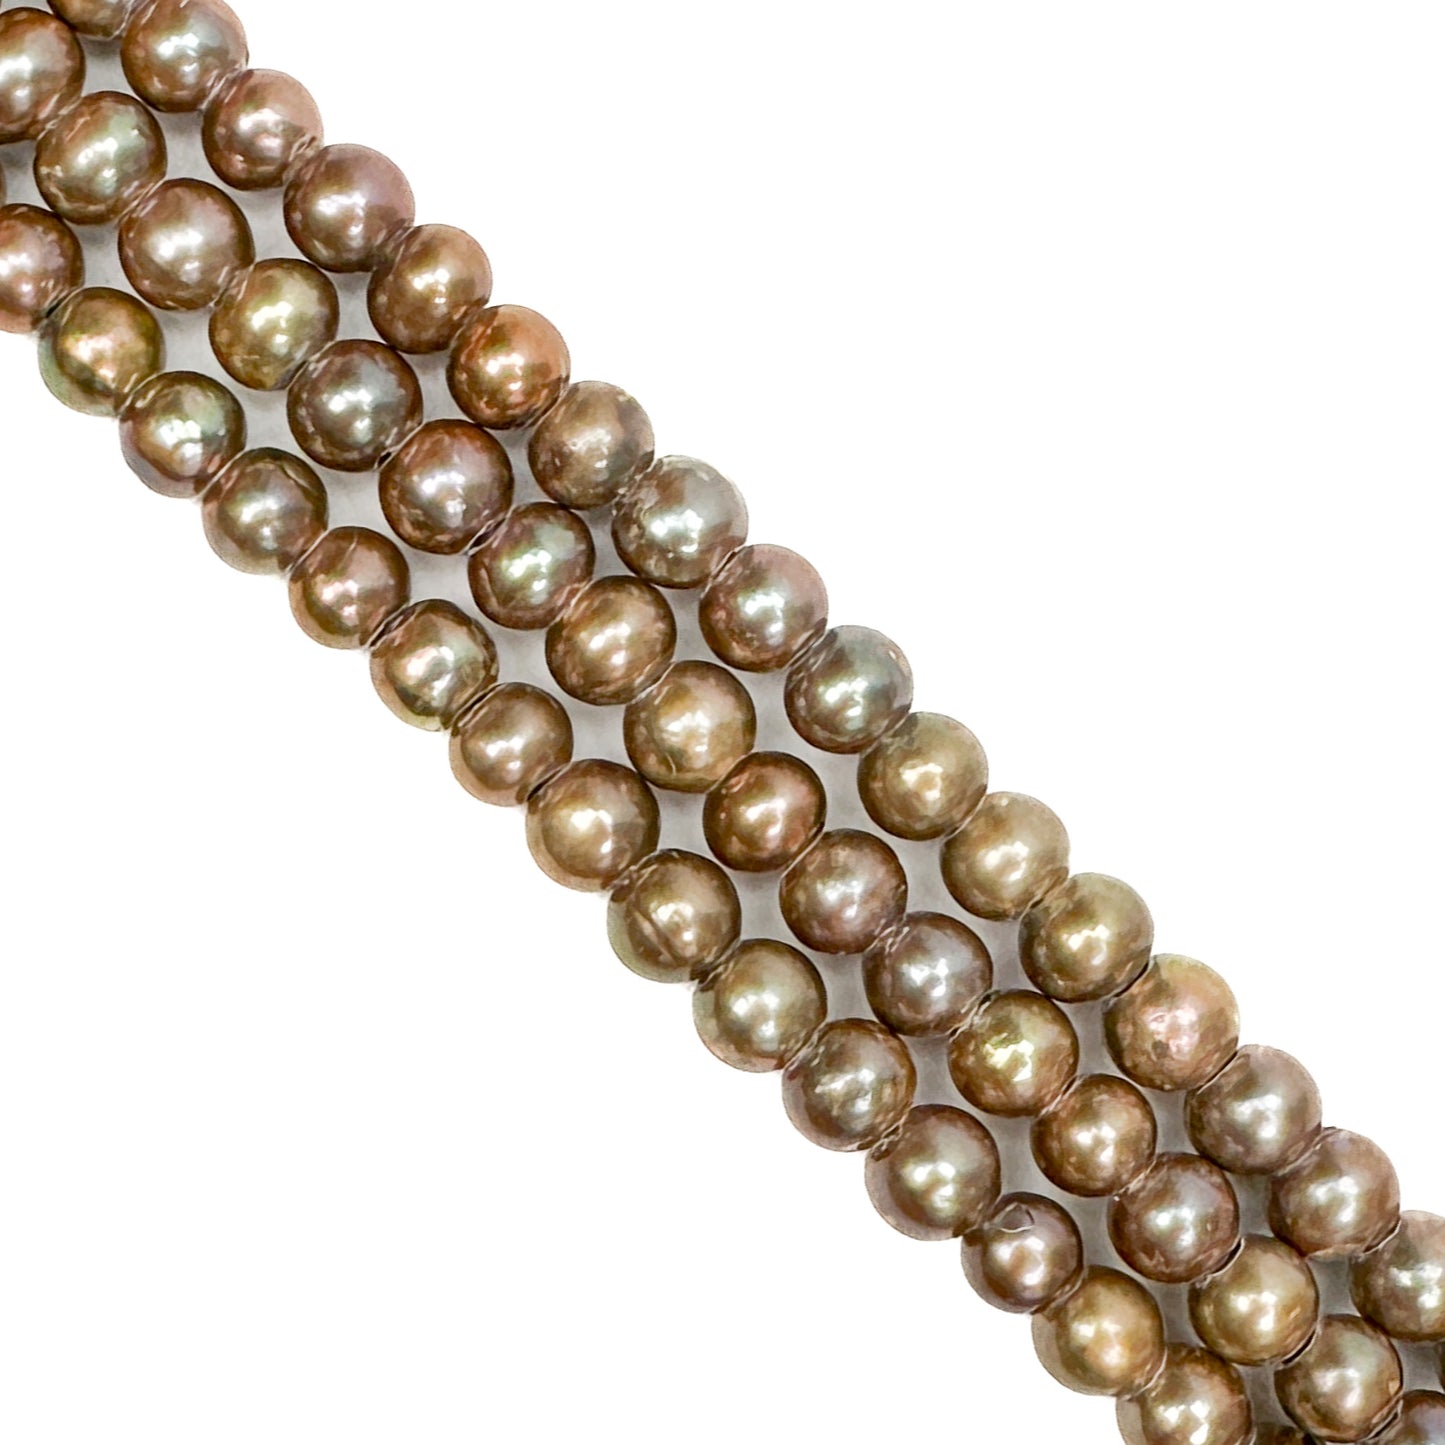 *Golden Olive 9mm Potato with Large Hole Freshwater Pearl Bead (3 Quantities Available)-The Bead Gallery Honolulu